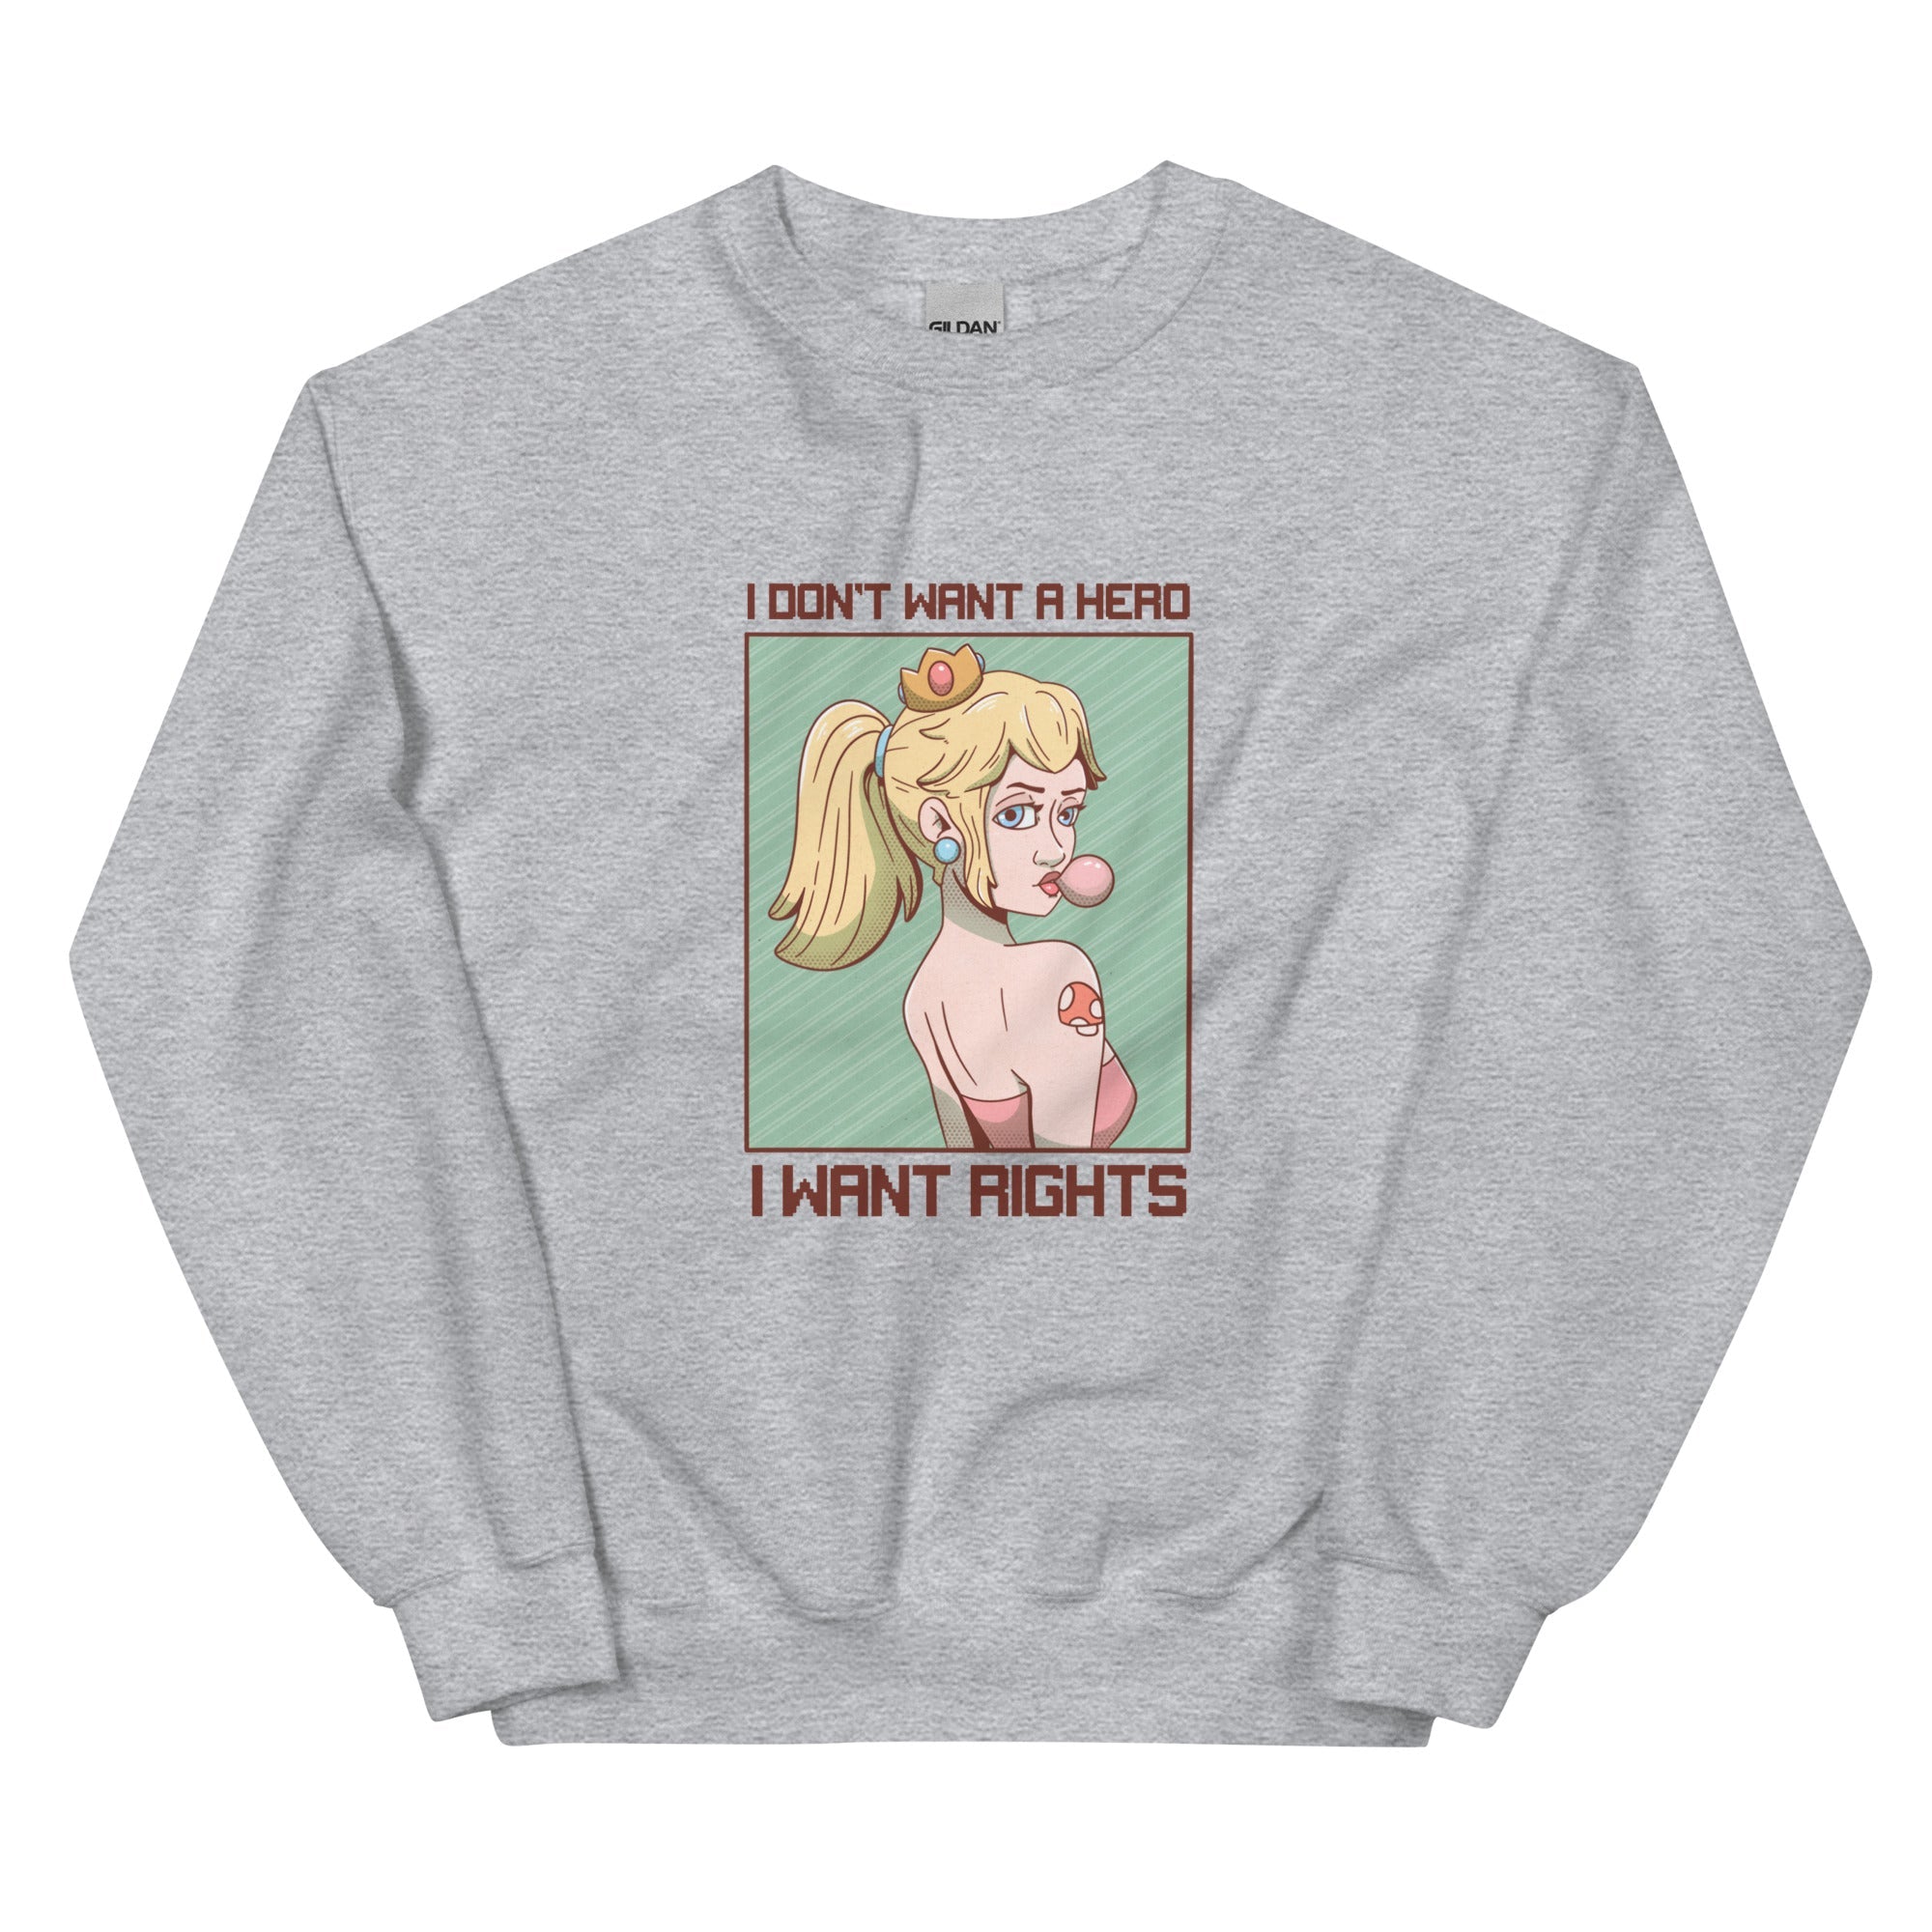 I Want Rights | Unisex Sweatshirt | Feminist Gamer Threads and Thistles Inventory Sport Grey S 